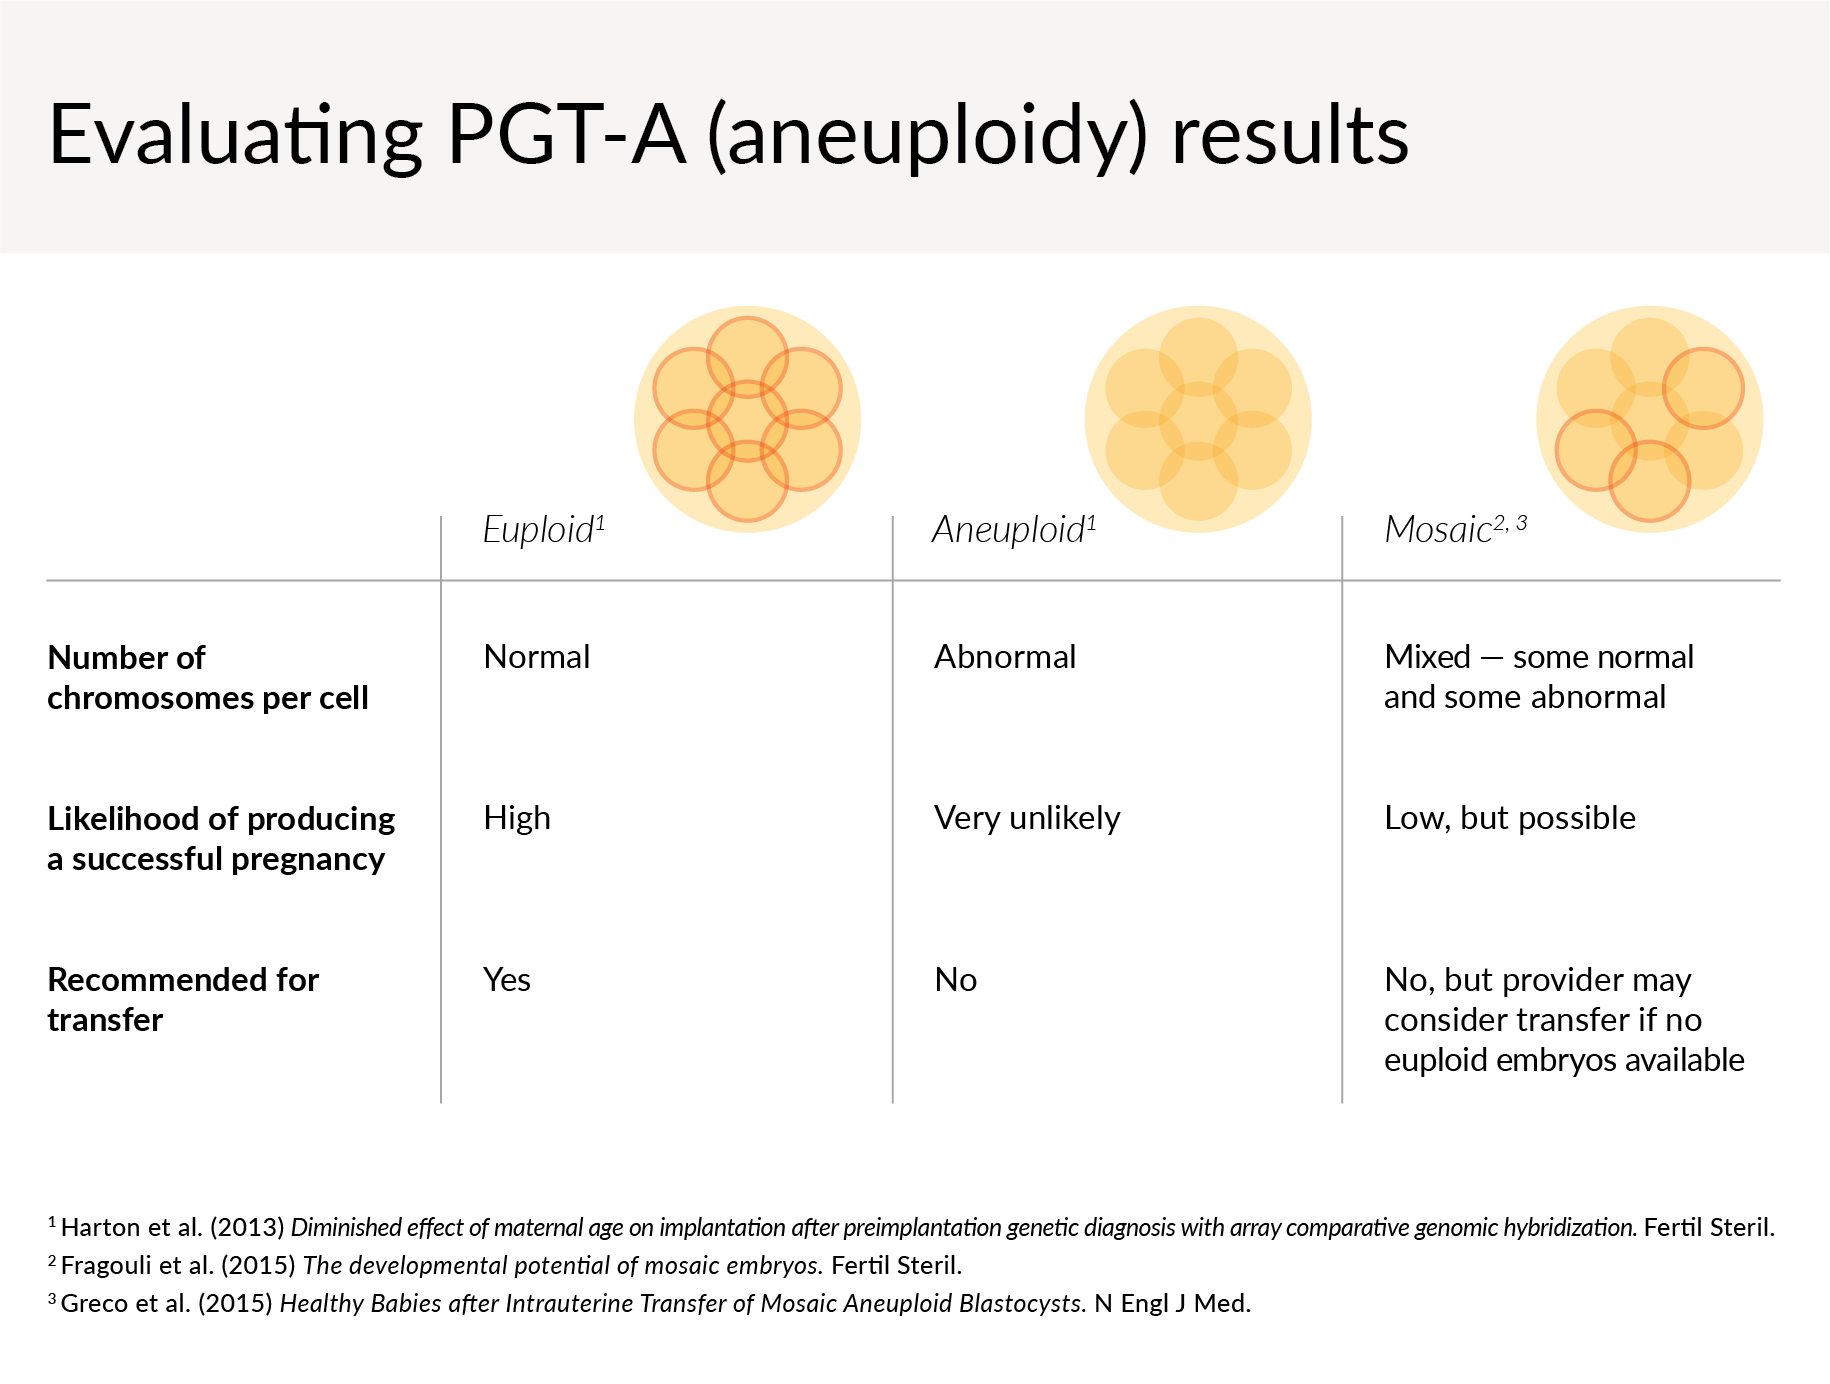 PGT-A (aneuploidy) results reveal that an embryo is euploid, aneuploid, or mosaic. Euploid embryos have a normal number of chromosomes per cell and have a high likelihood of producing a successful pregnancy, and are recommended for transfer.